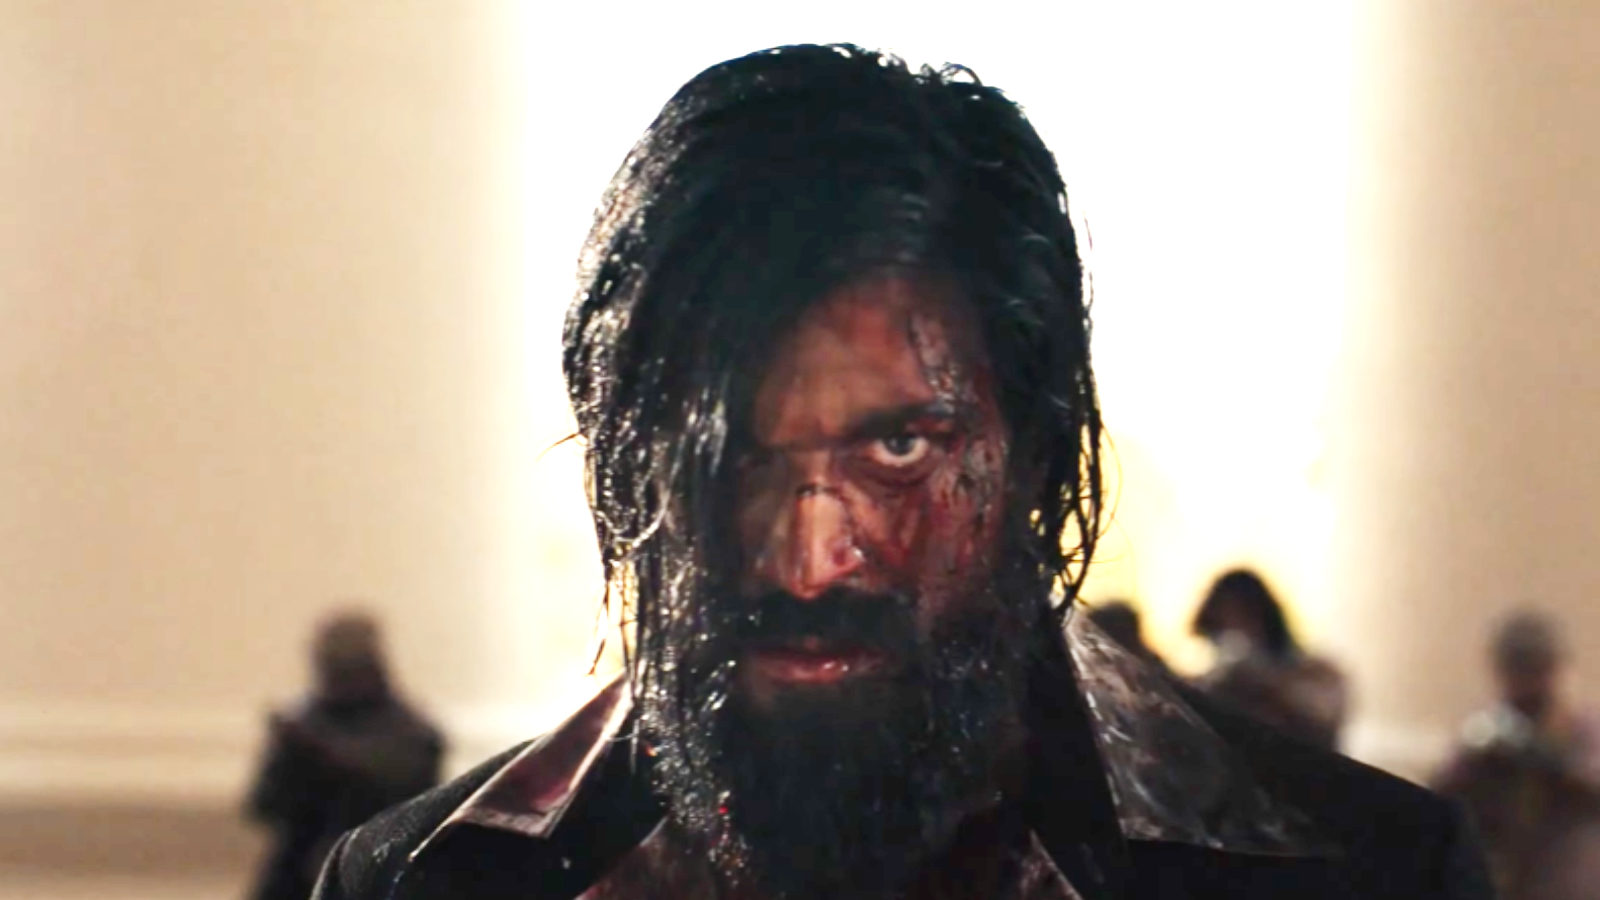 KGF 2 Out: Sanjay Dutt was seen challenging Rocky Bhai, there is more than one dialogue in the powerful trailer Post Reader